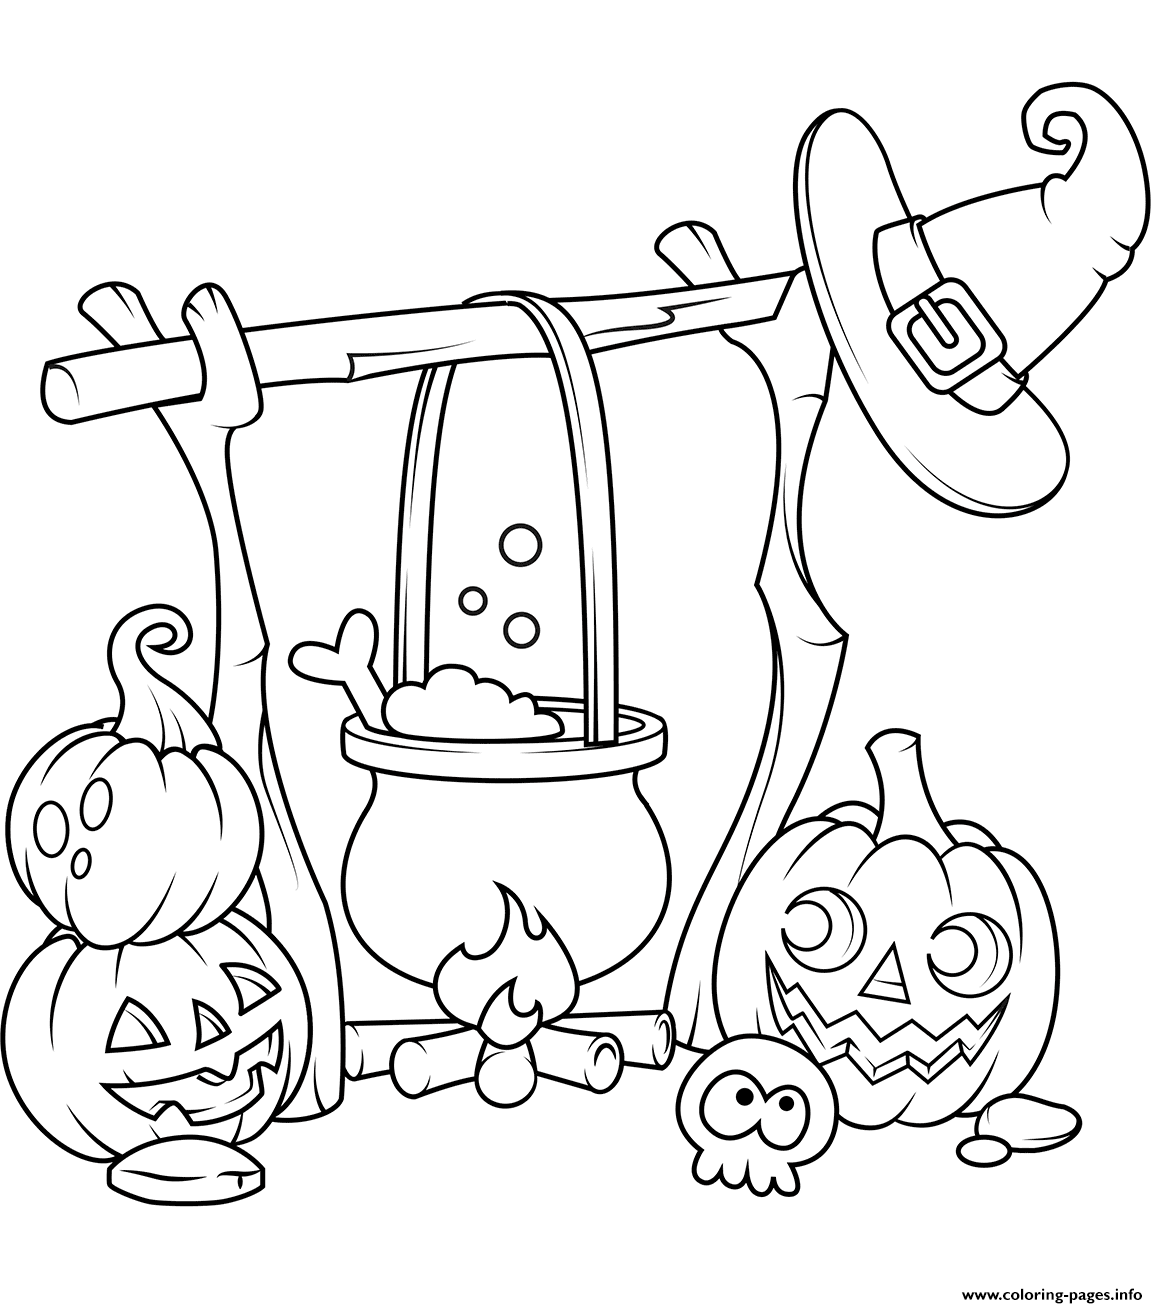 Jack O Lanterns And A Boiling Cauldron Halloween Coloring Pages Printable